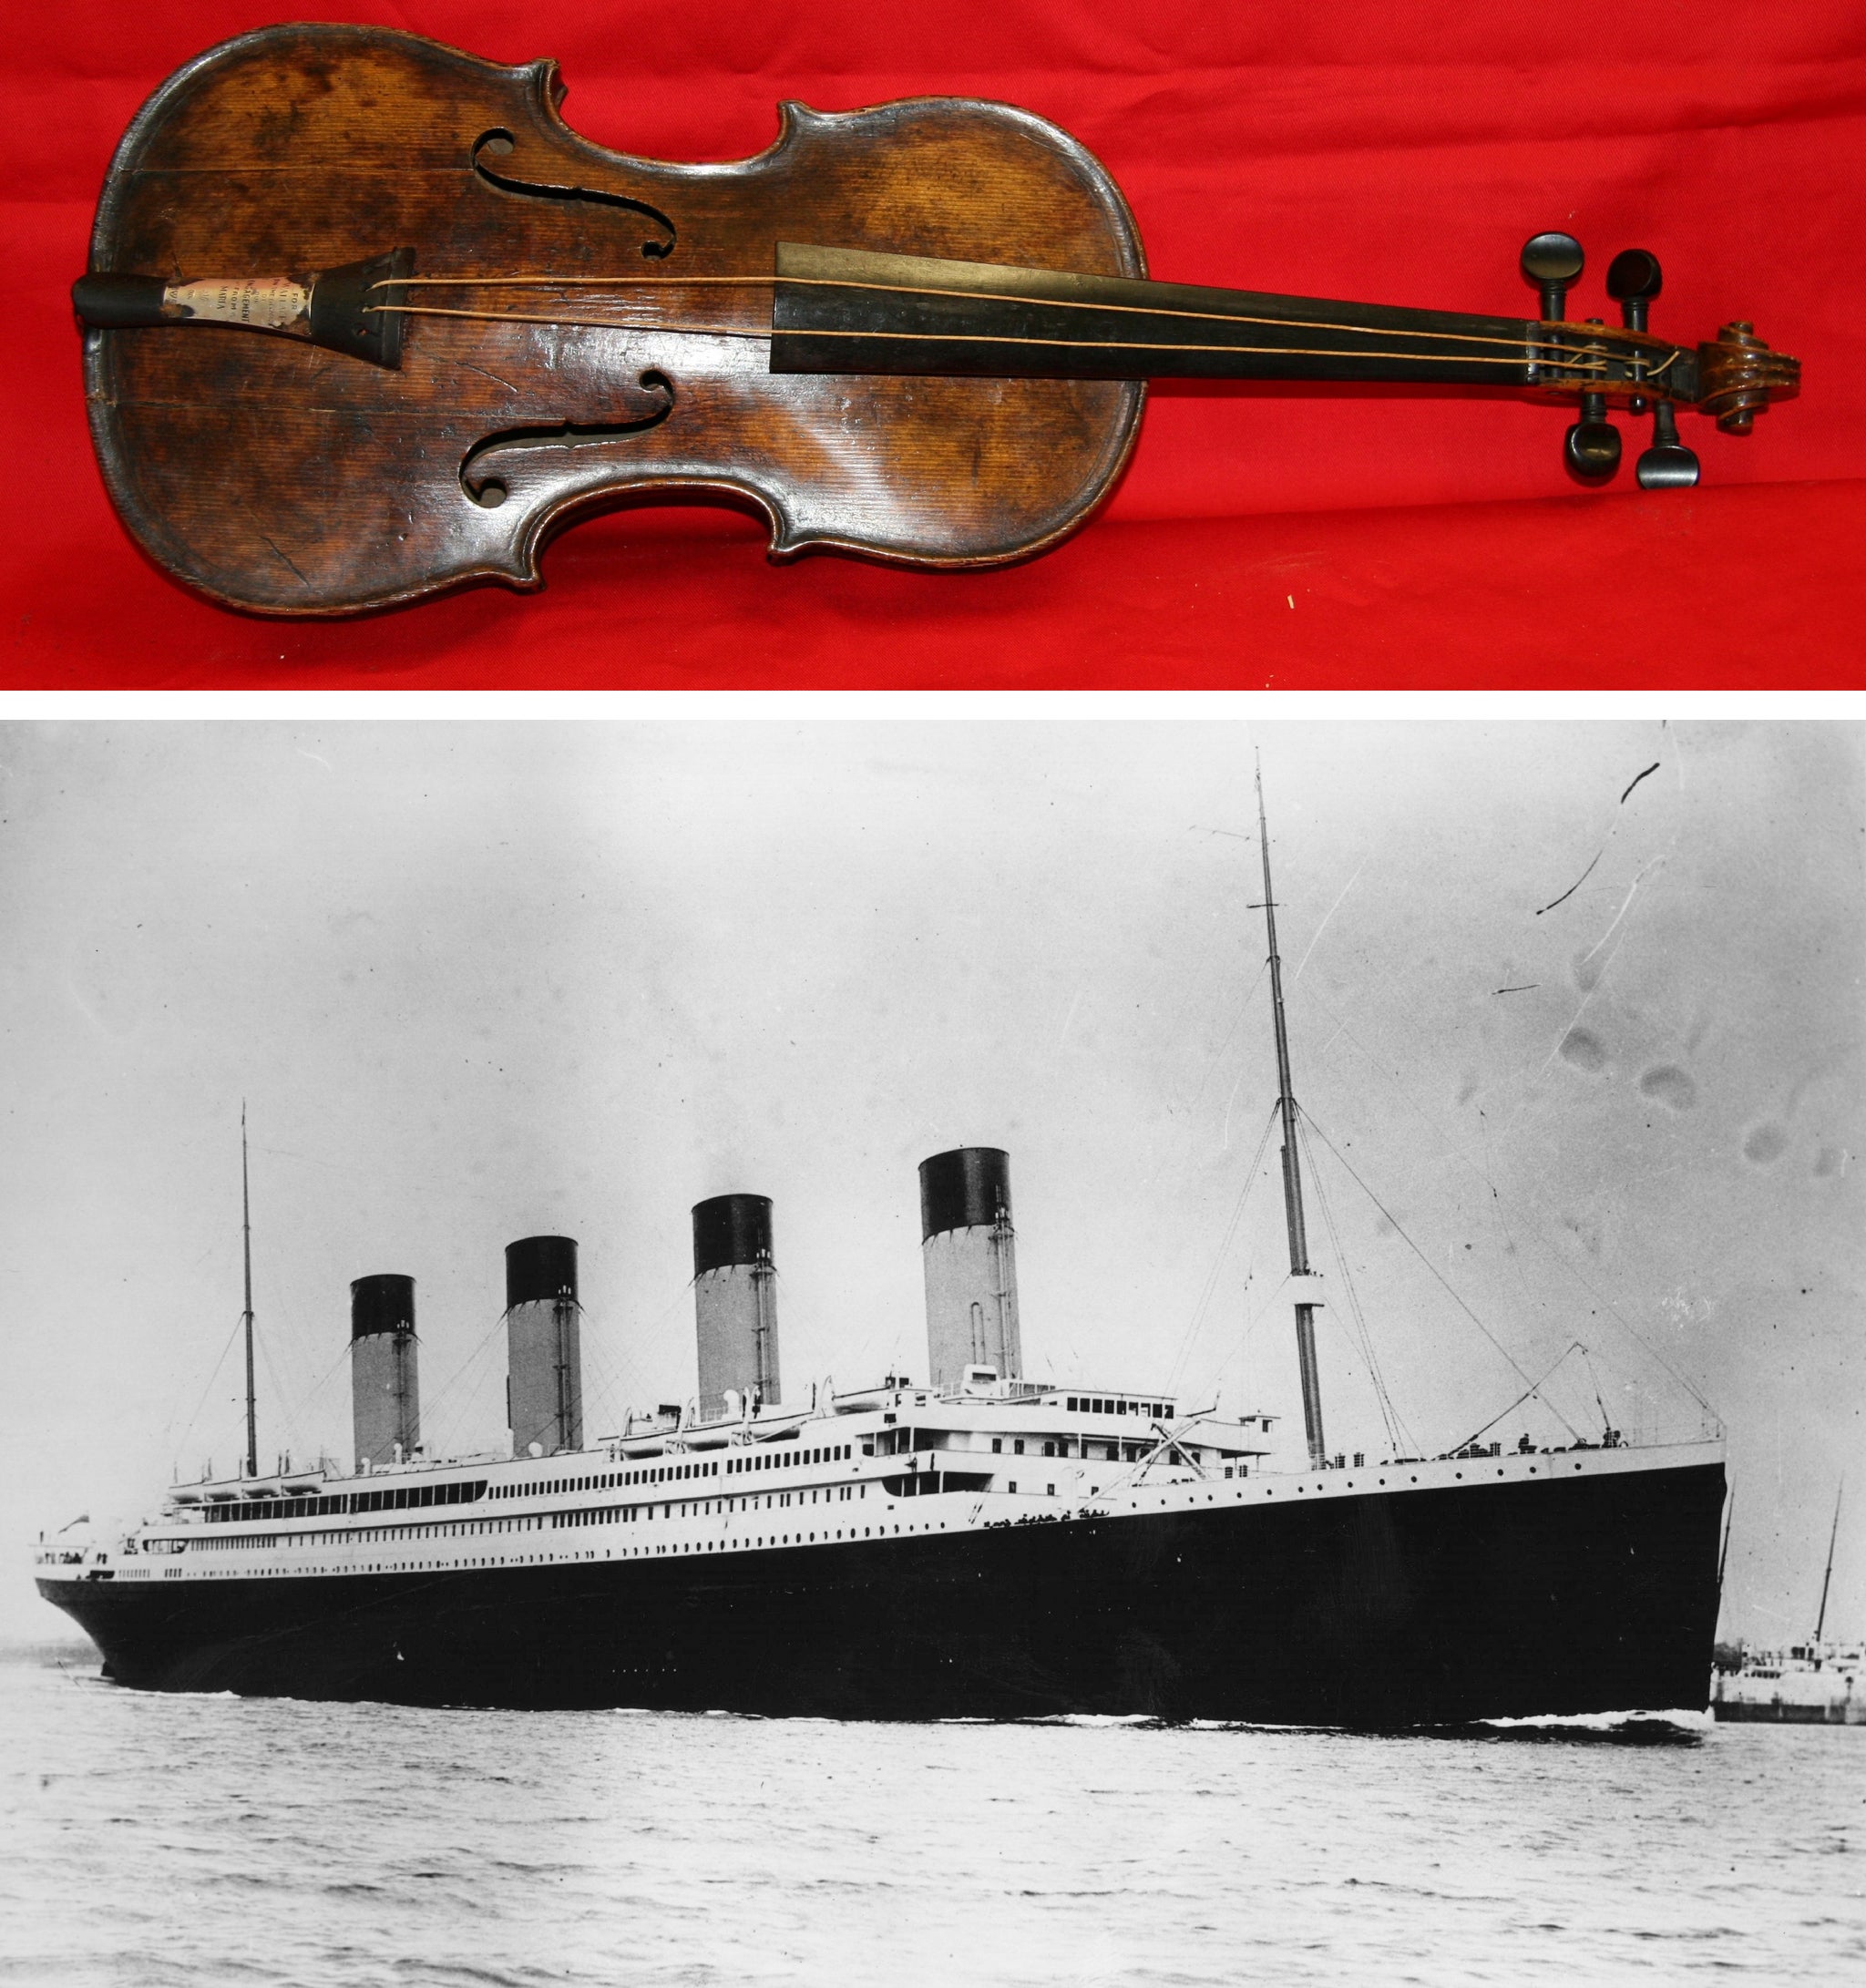 Top: the instrument alleged to have belonged to Titanic band leader Wallace Hartley who died when the ship sank. Bottom: the ocean liner which sank on its maiden voyage after hitting and iceberg